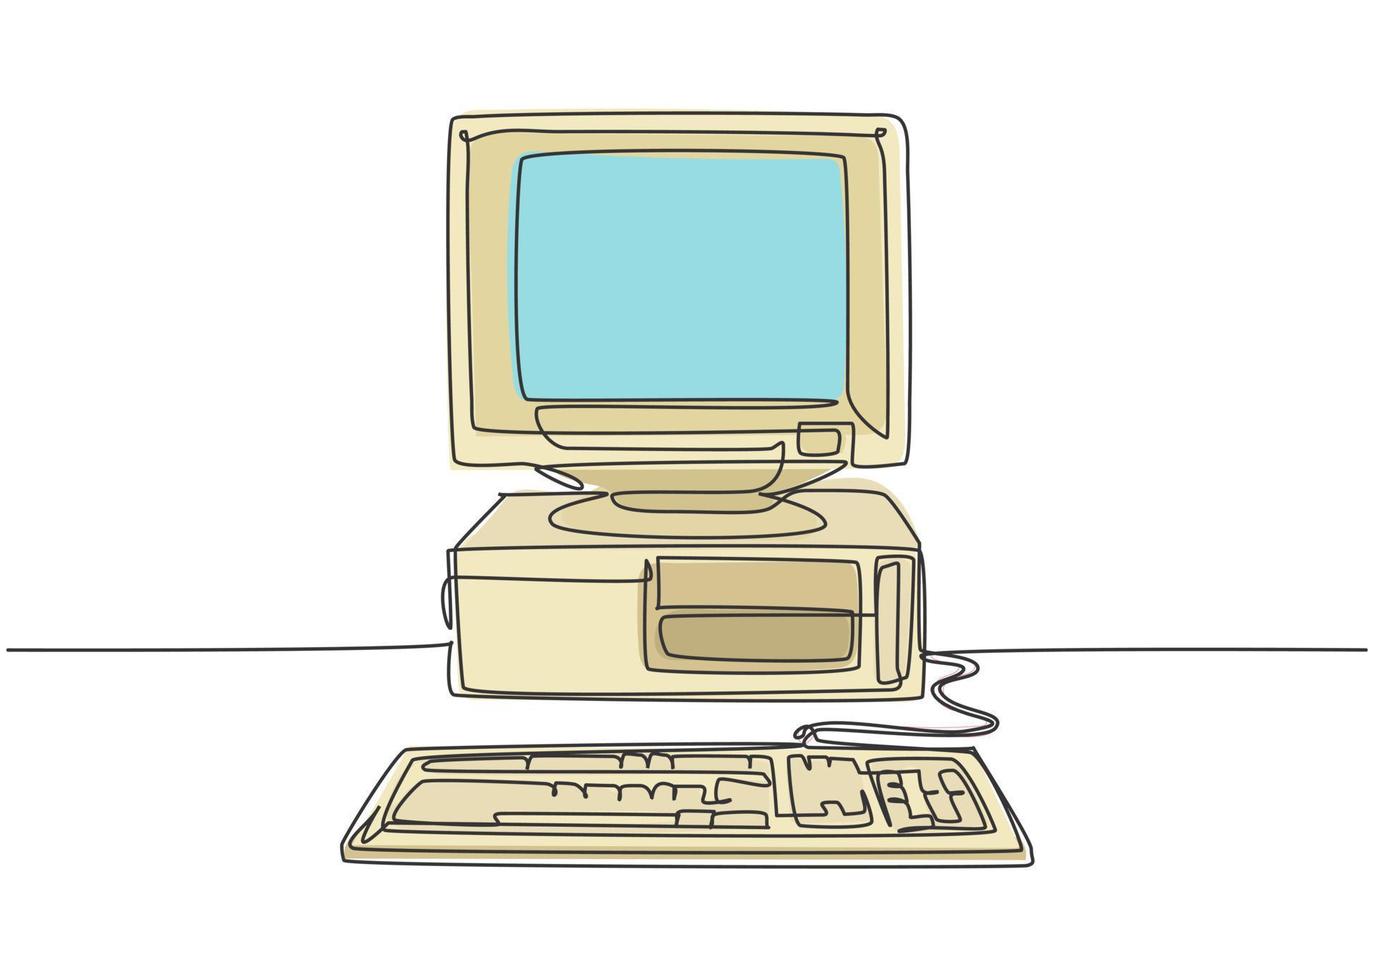 Single continuous line drawing of retro old classic personal computer processor unit. Vintage cpu with analog monitor and keyboard item concept one line draw graphic design vector illustration